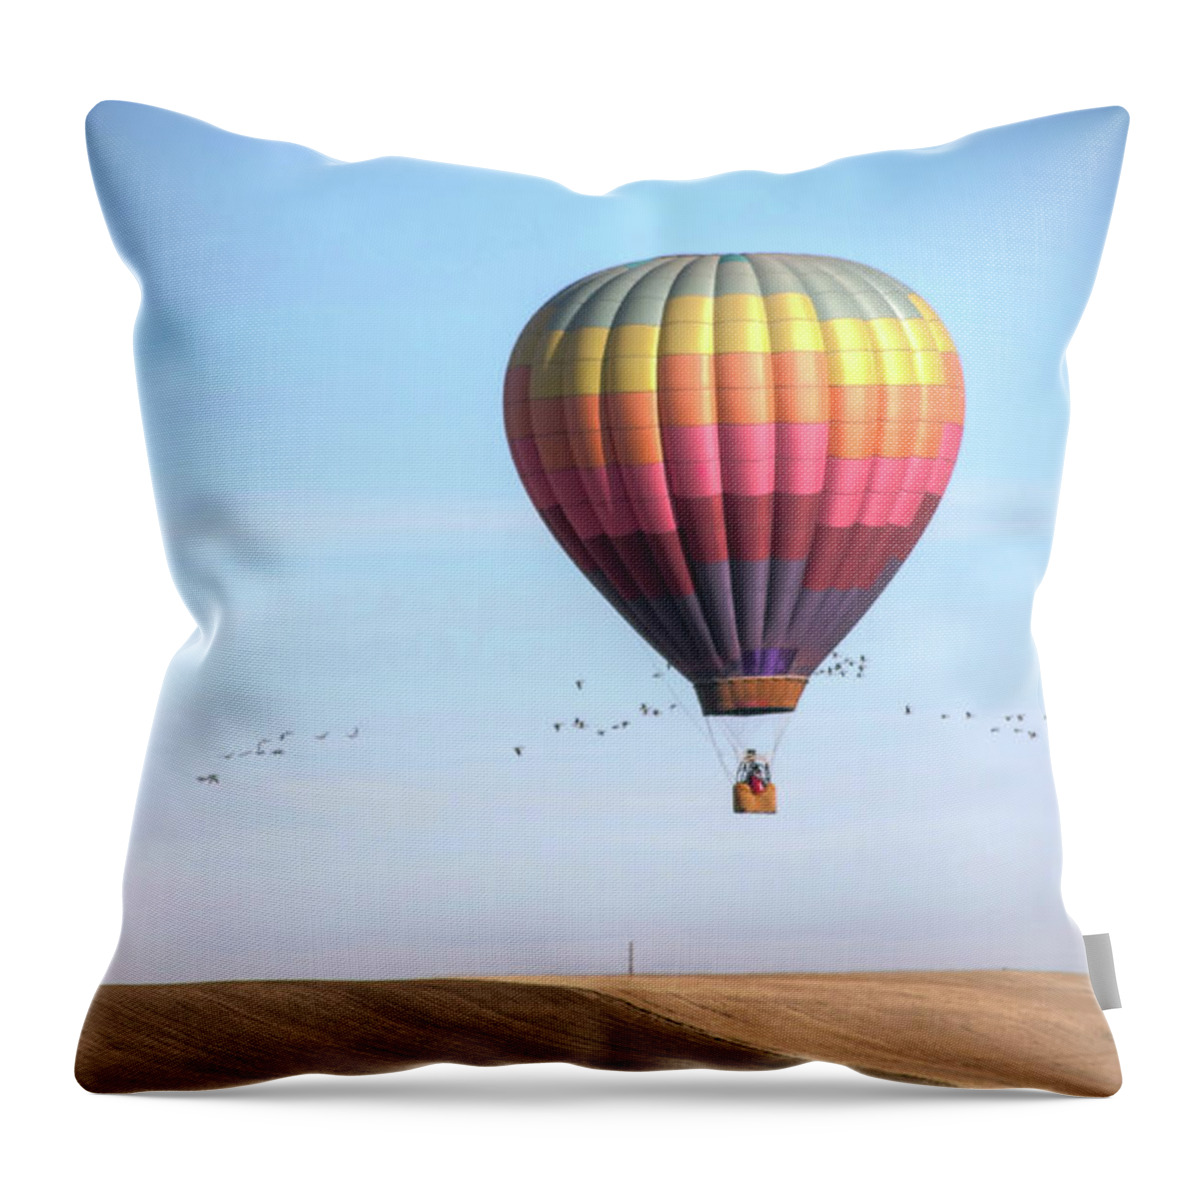 Animal Themes Throw Pillow featuring the photograph Hot Air Balloon And Birds by Photo By Greg Thow